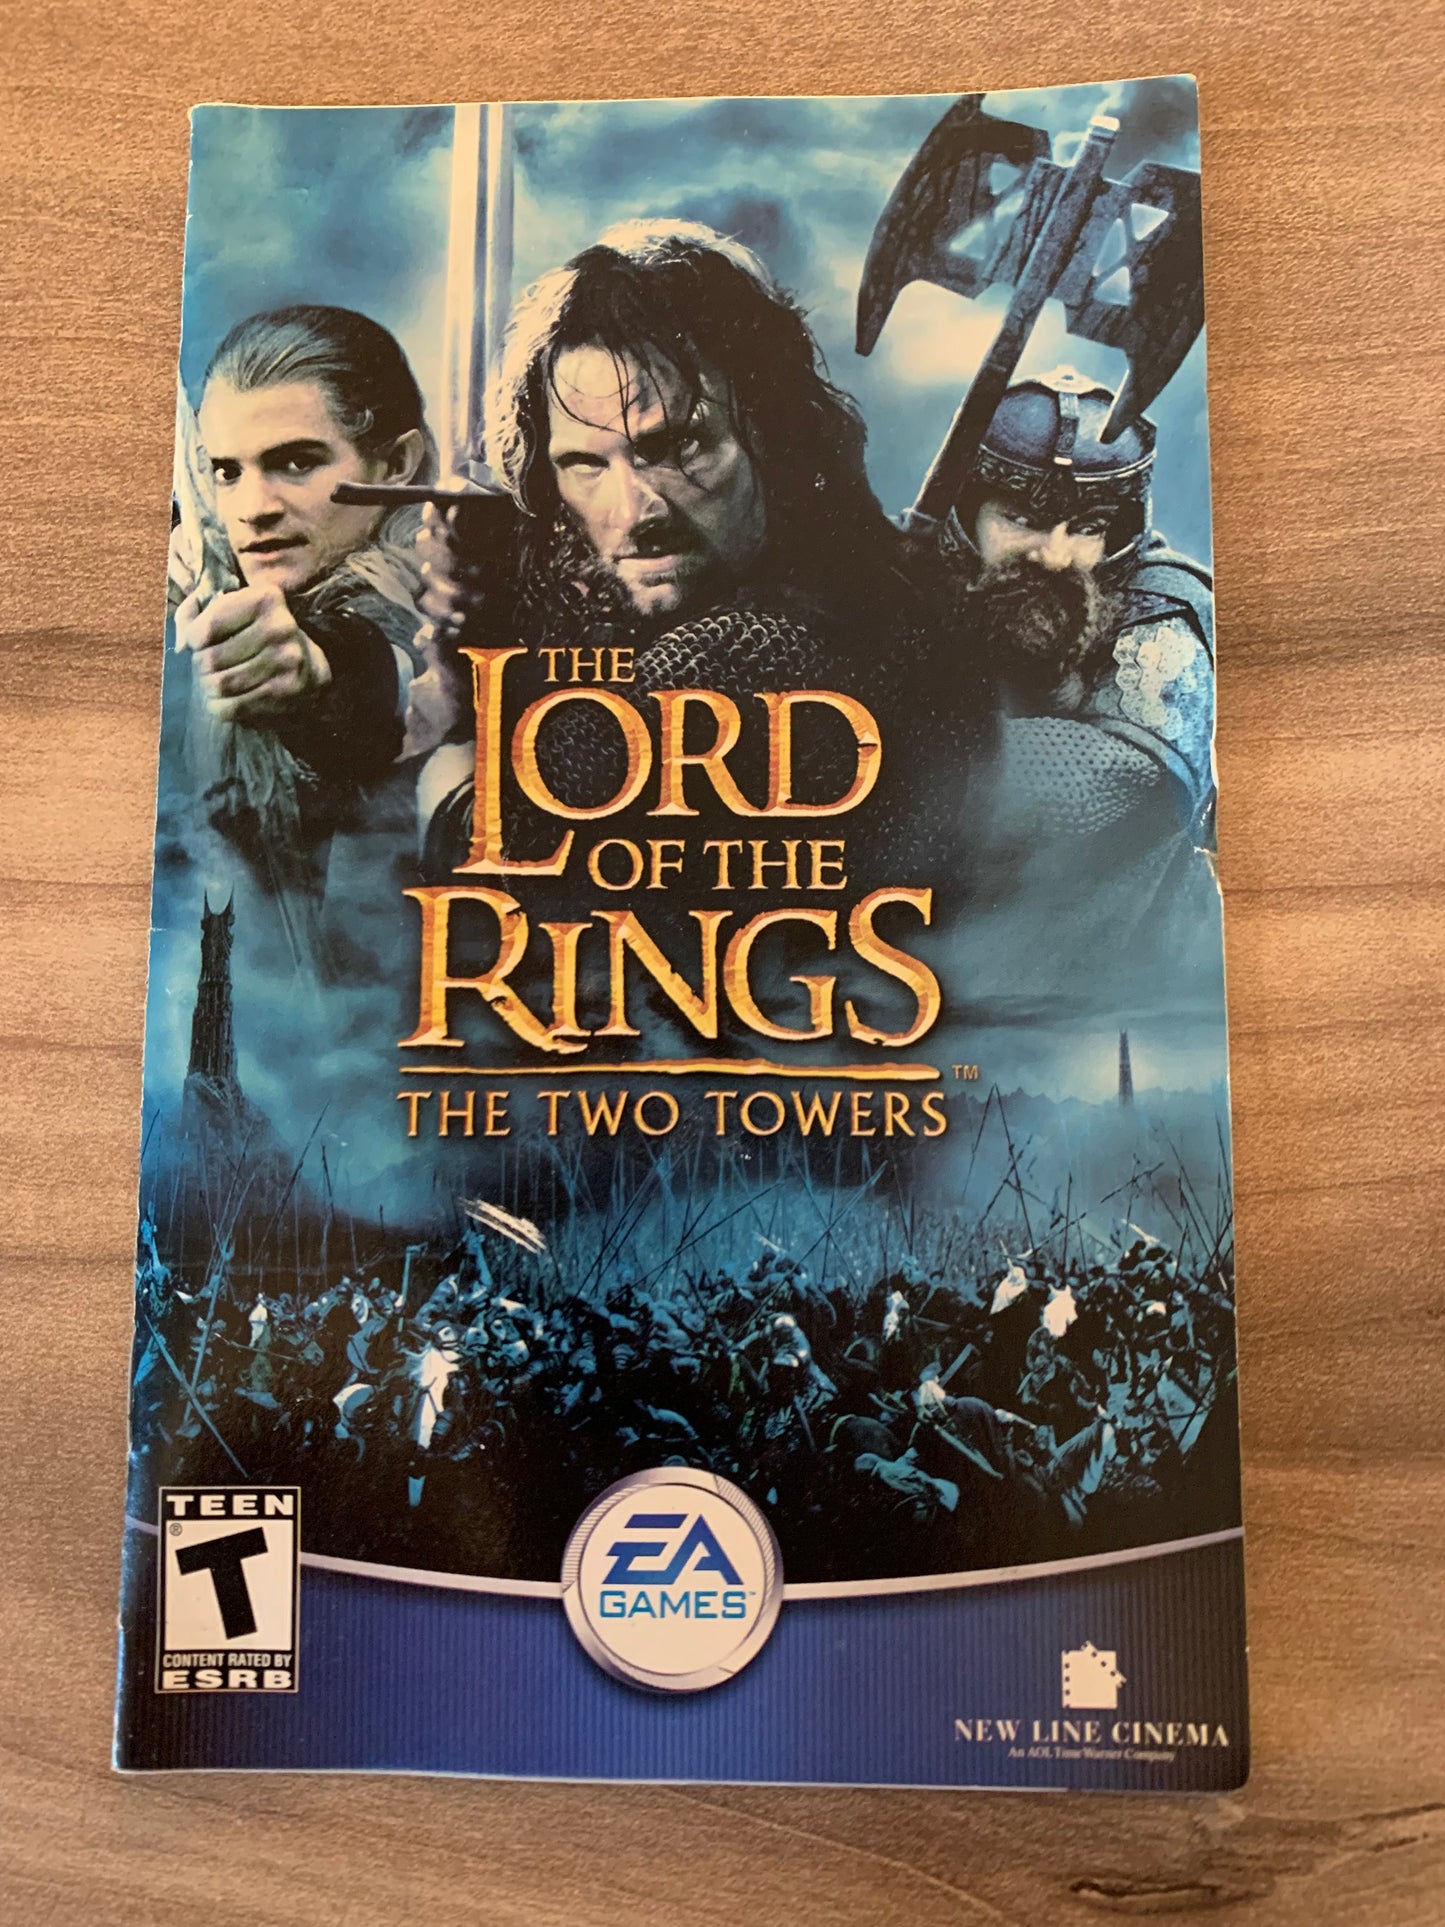 SONY PLAYSTATiON 2 [PS2] | THE LORD OF THE RiNGS THE TWO TOWERS